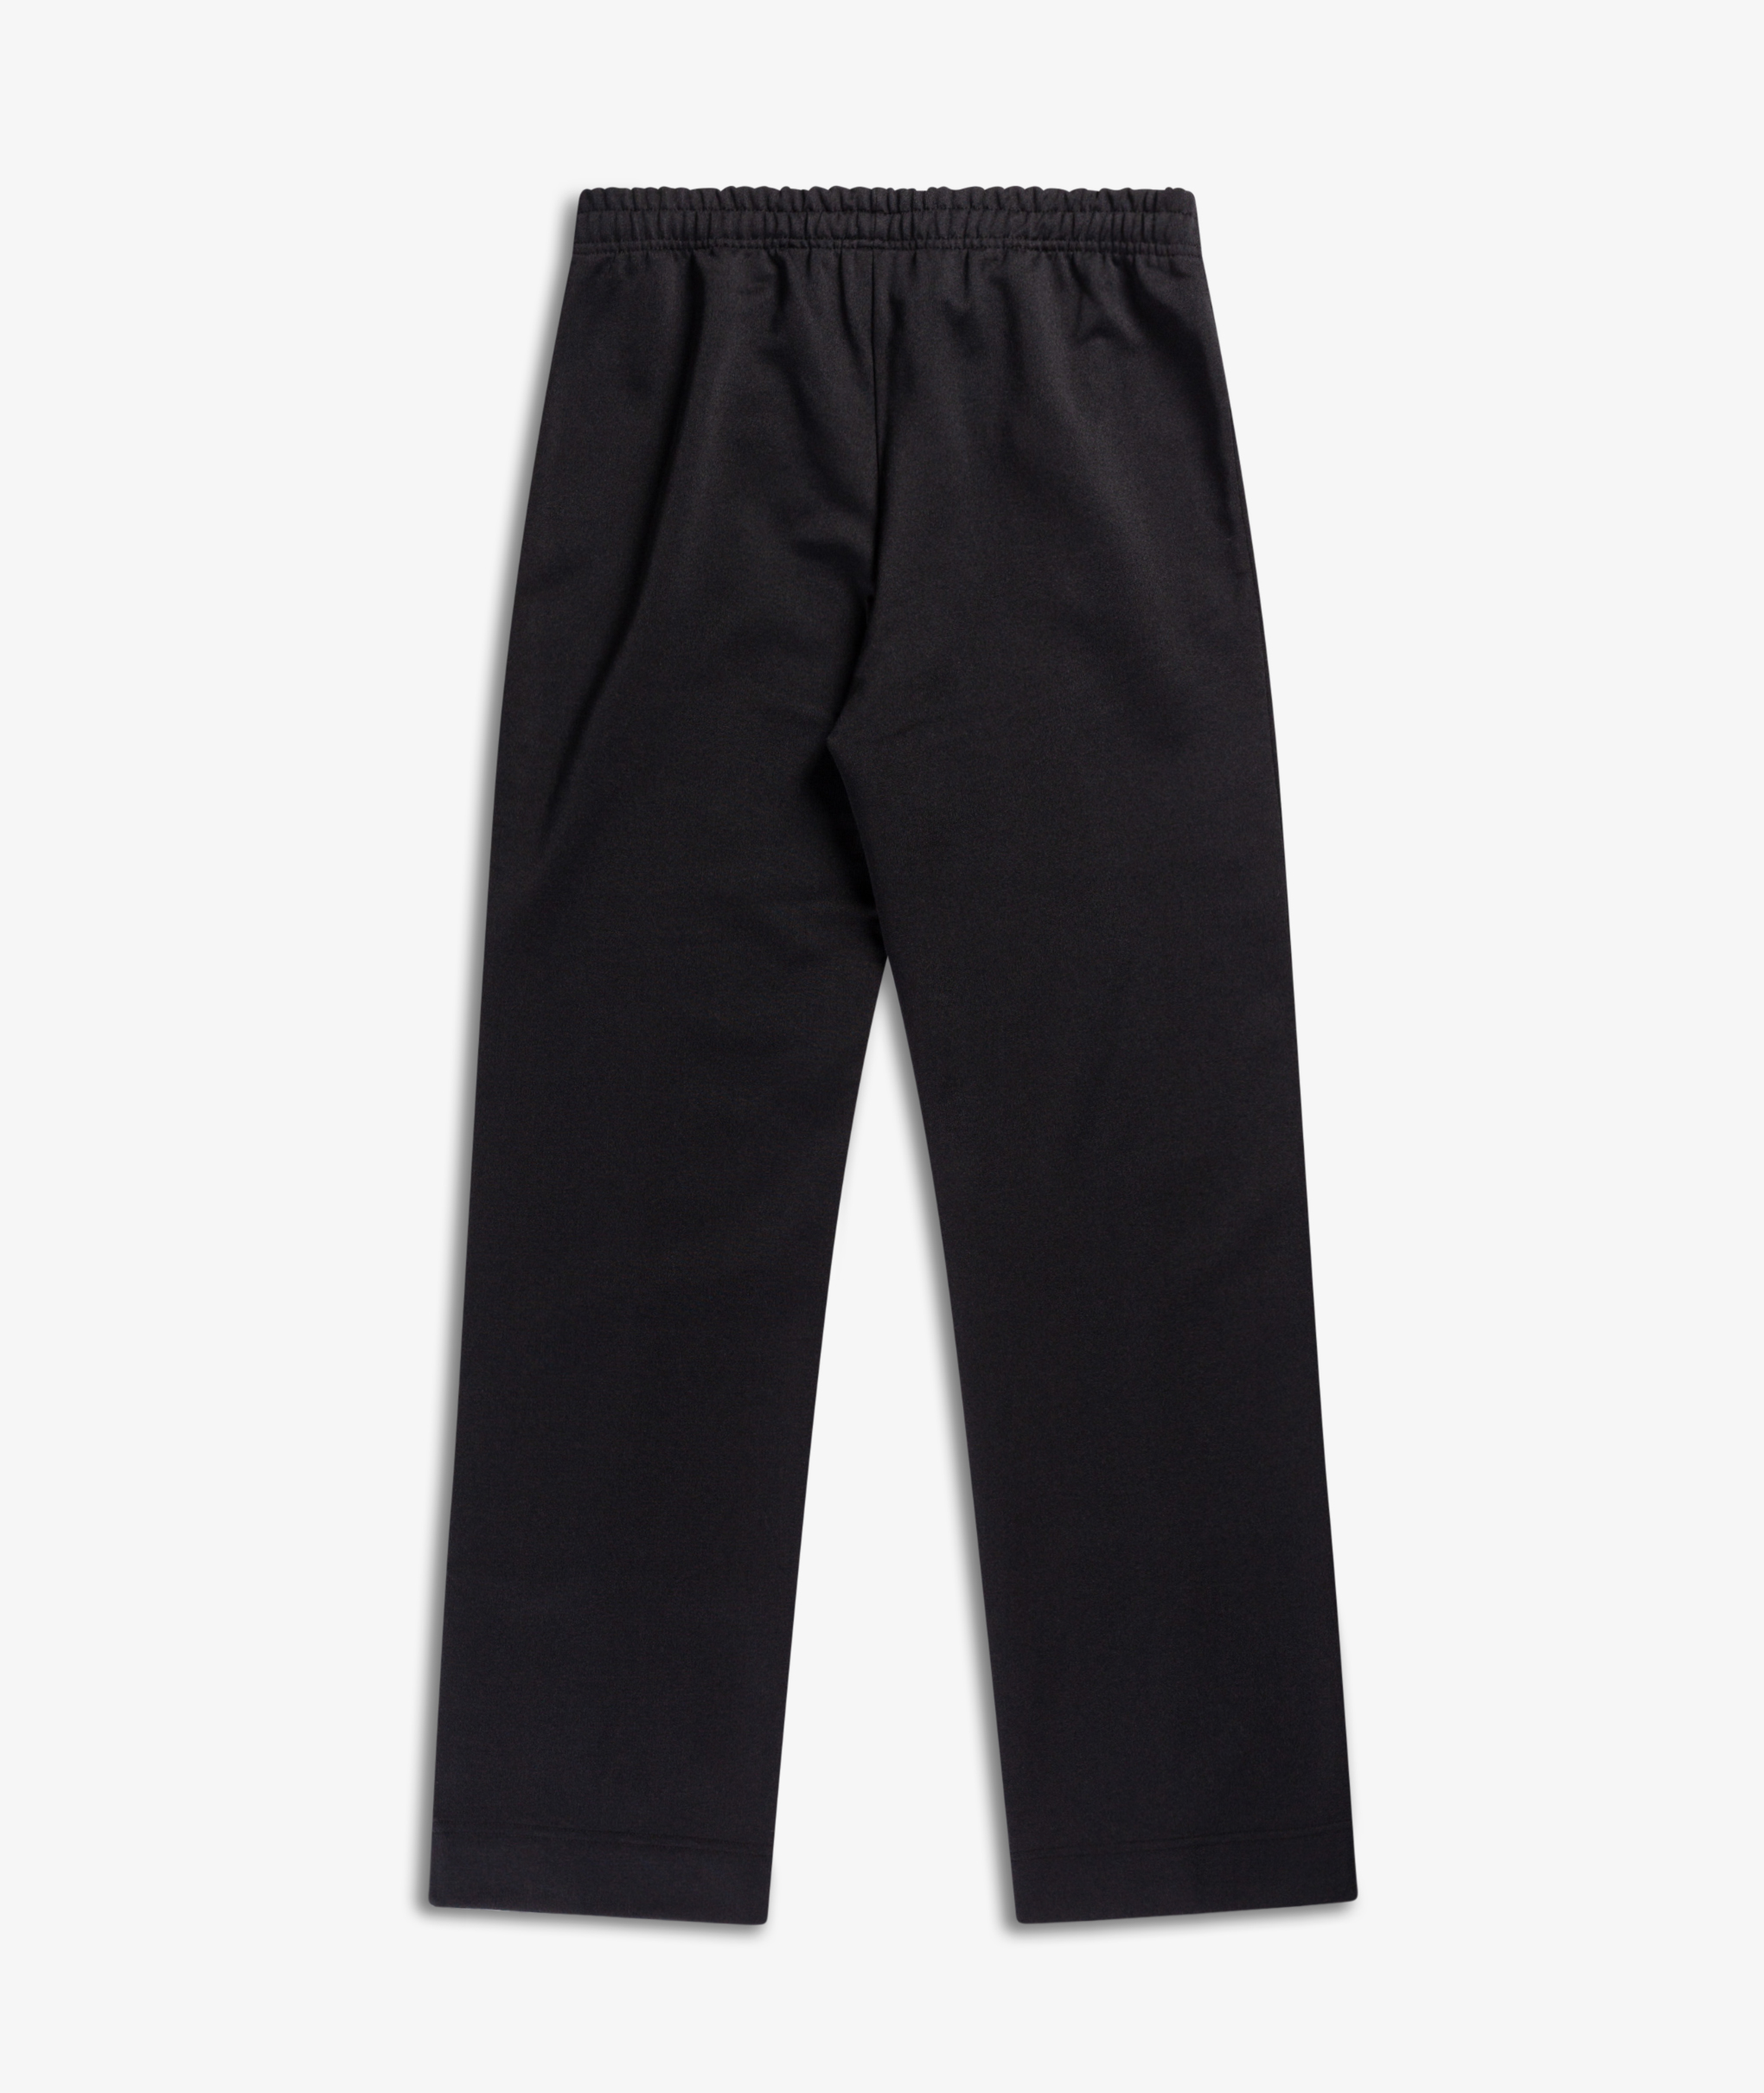 Norse Store  Shipping Worldwide - Sunflower Track Pants - Black